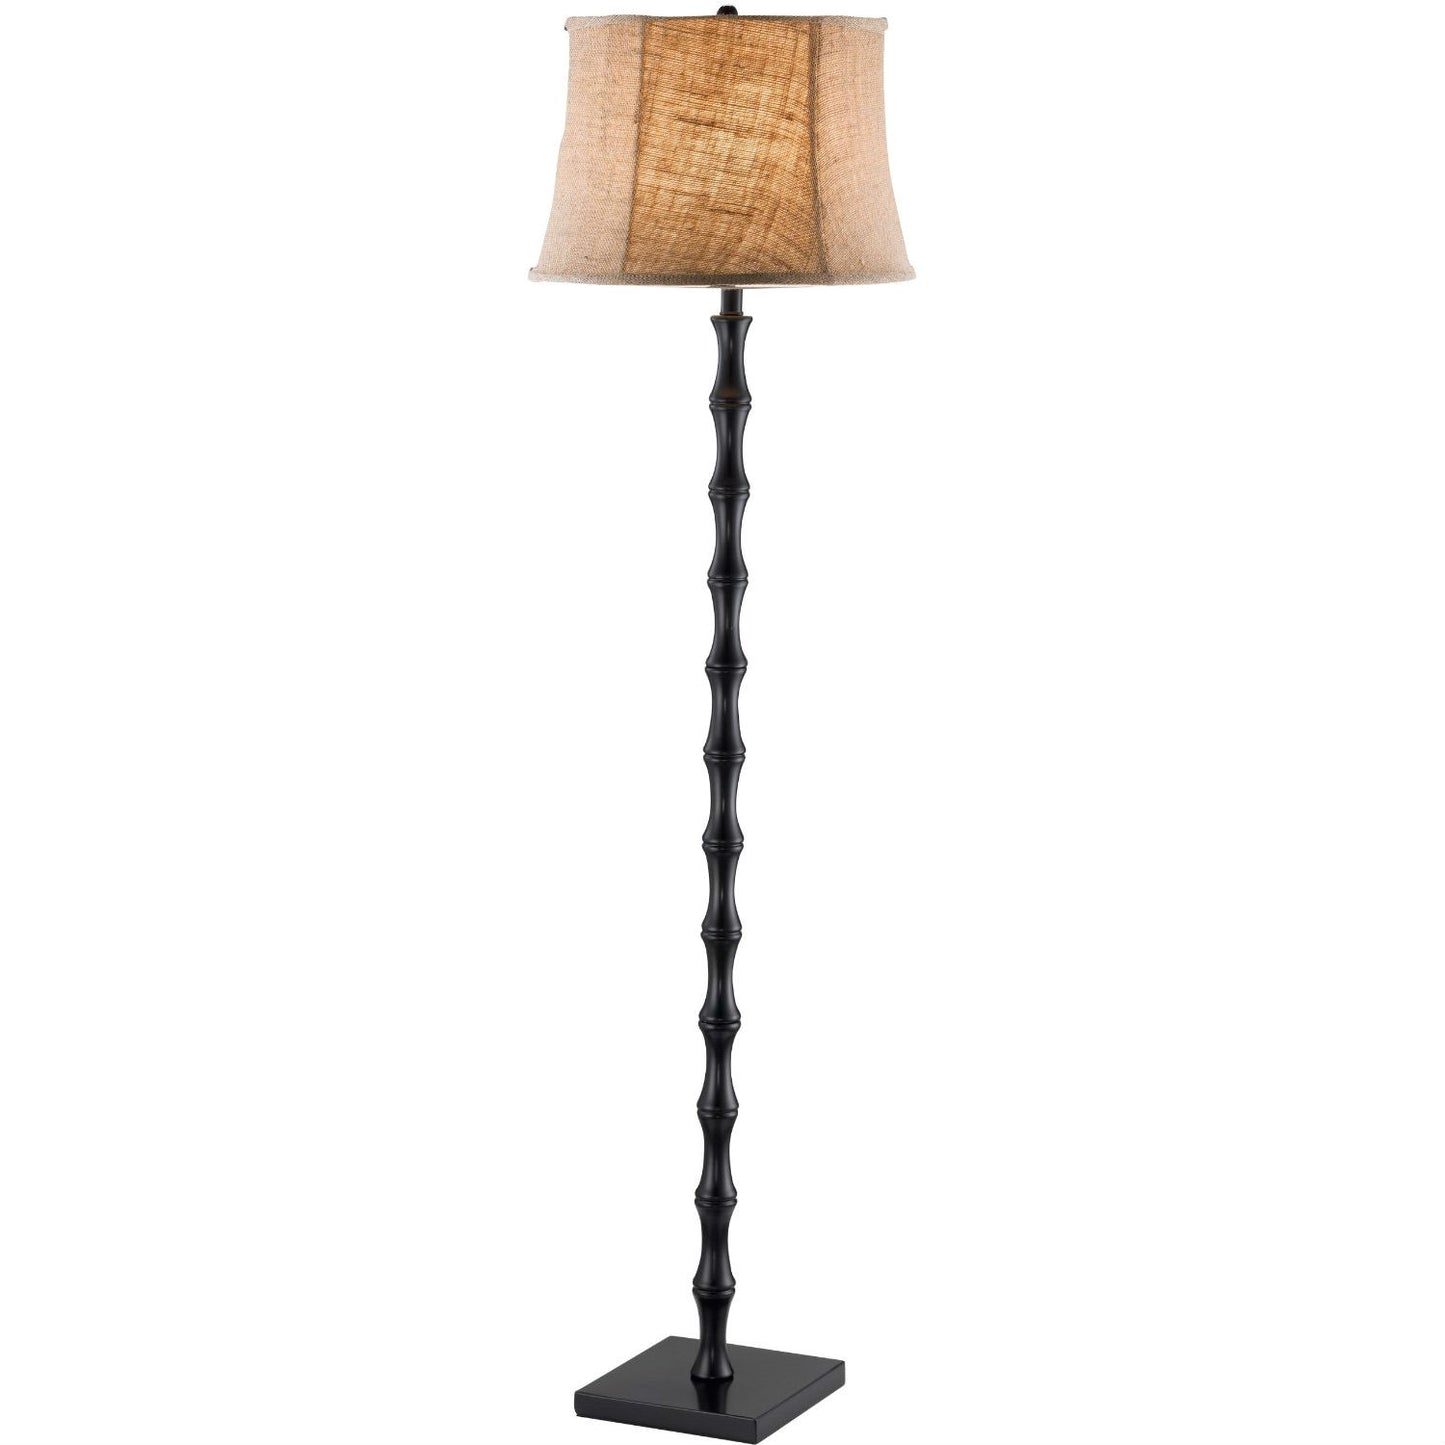 Traditional Floor Lamp with Black Metal Pole and Brown Burlap Bell Shade